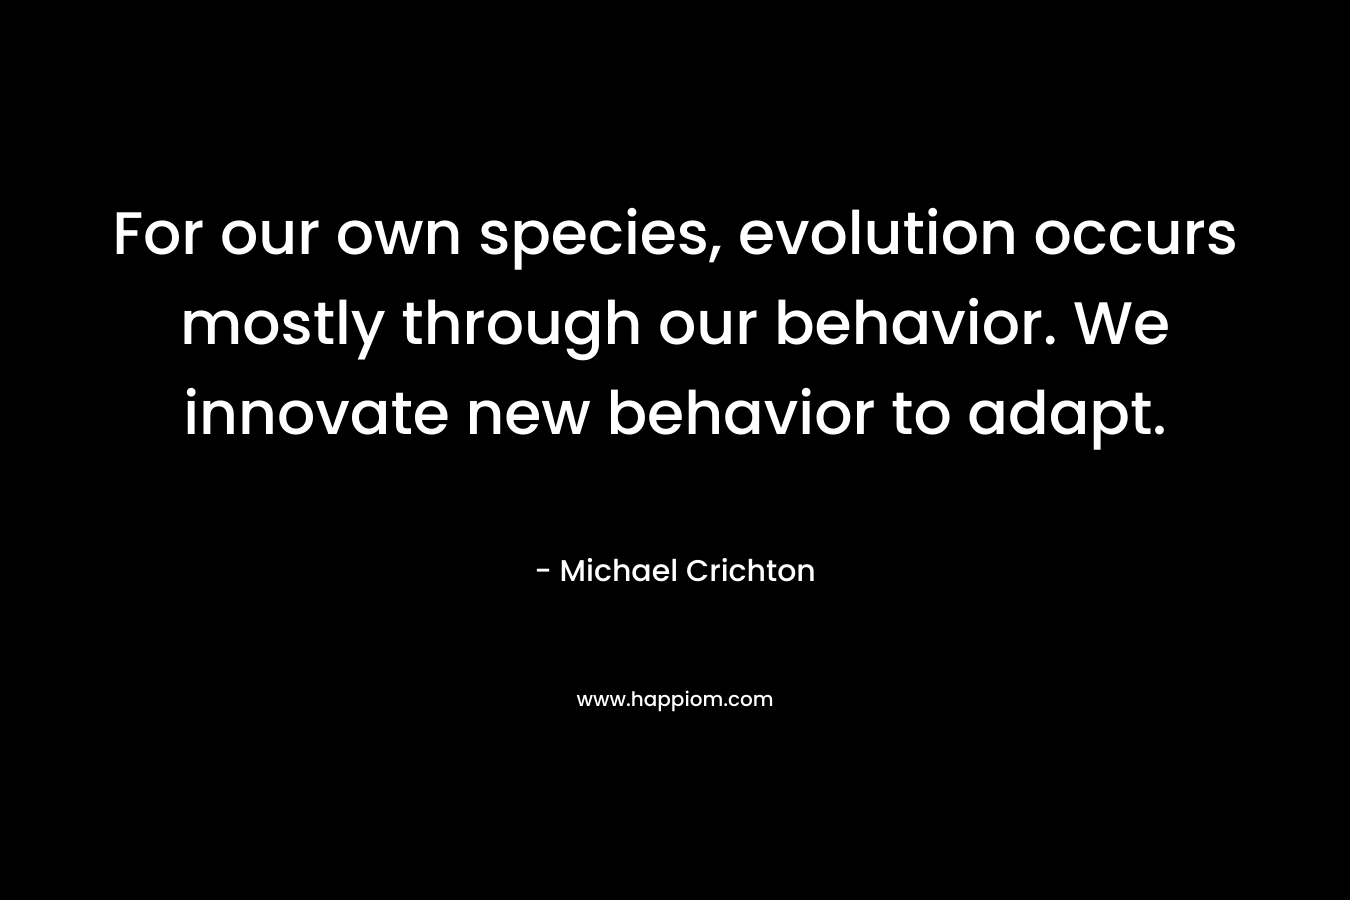 For our own species, evolution occurs mostly through our behavior. We innovate new behavior to adapt. – Michael Crichton